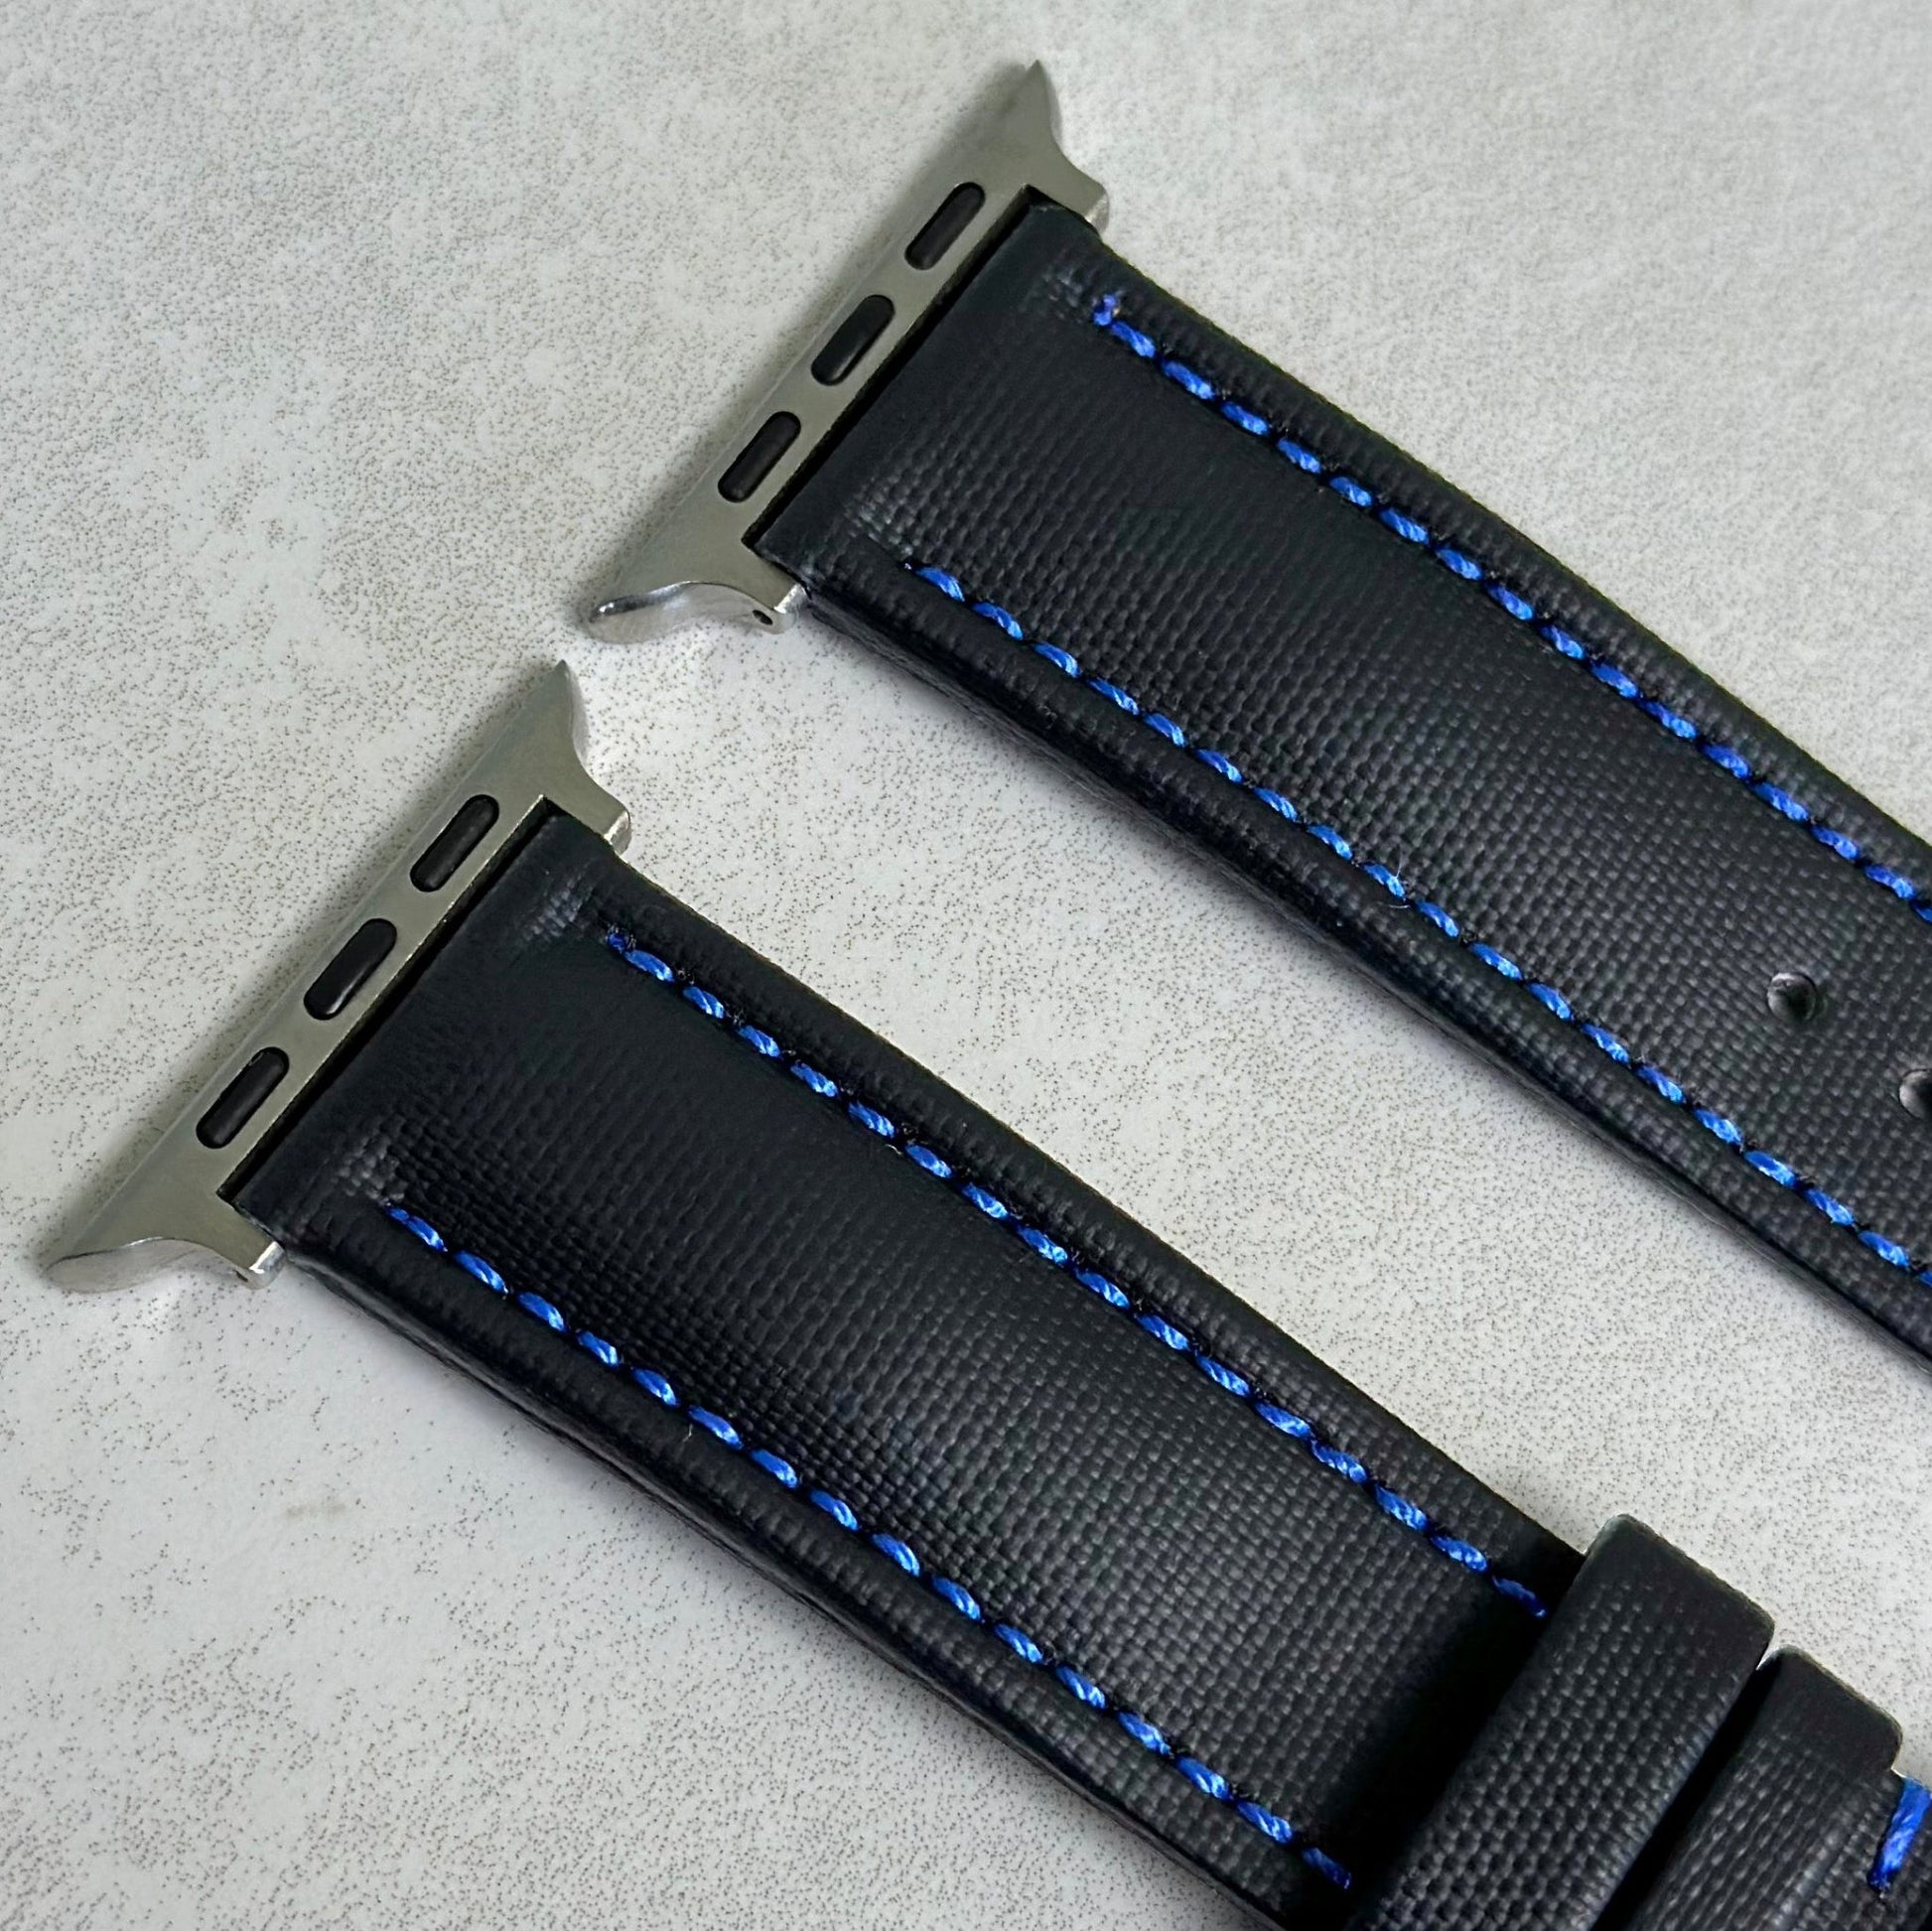 Top of the Bermuda jet black sail cloth Apple Watch strap with blue stitching. Padded sail cloth strap. Watch And Strap